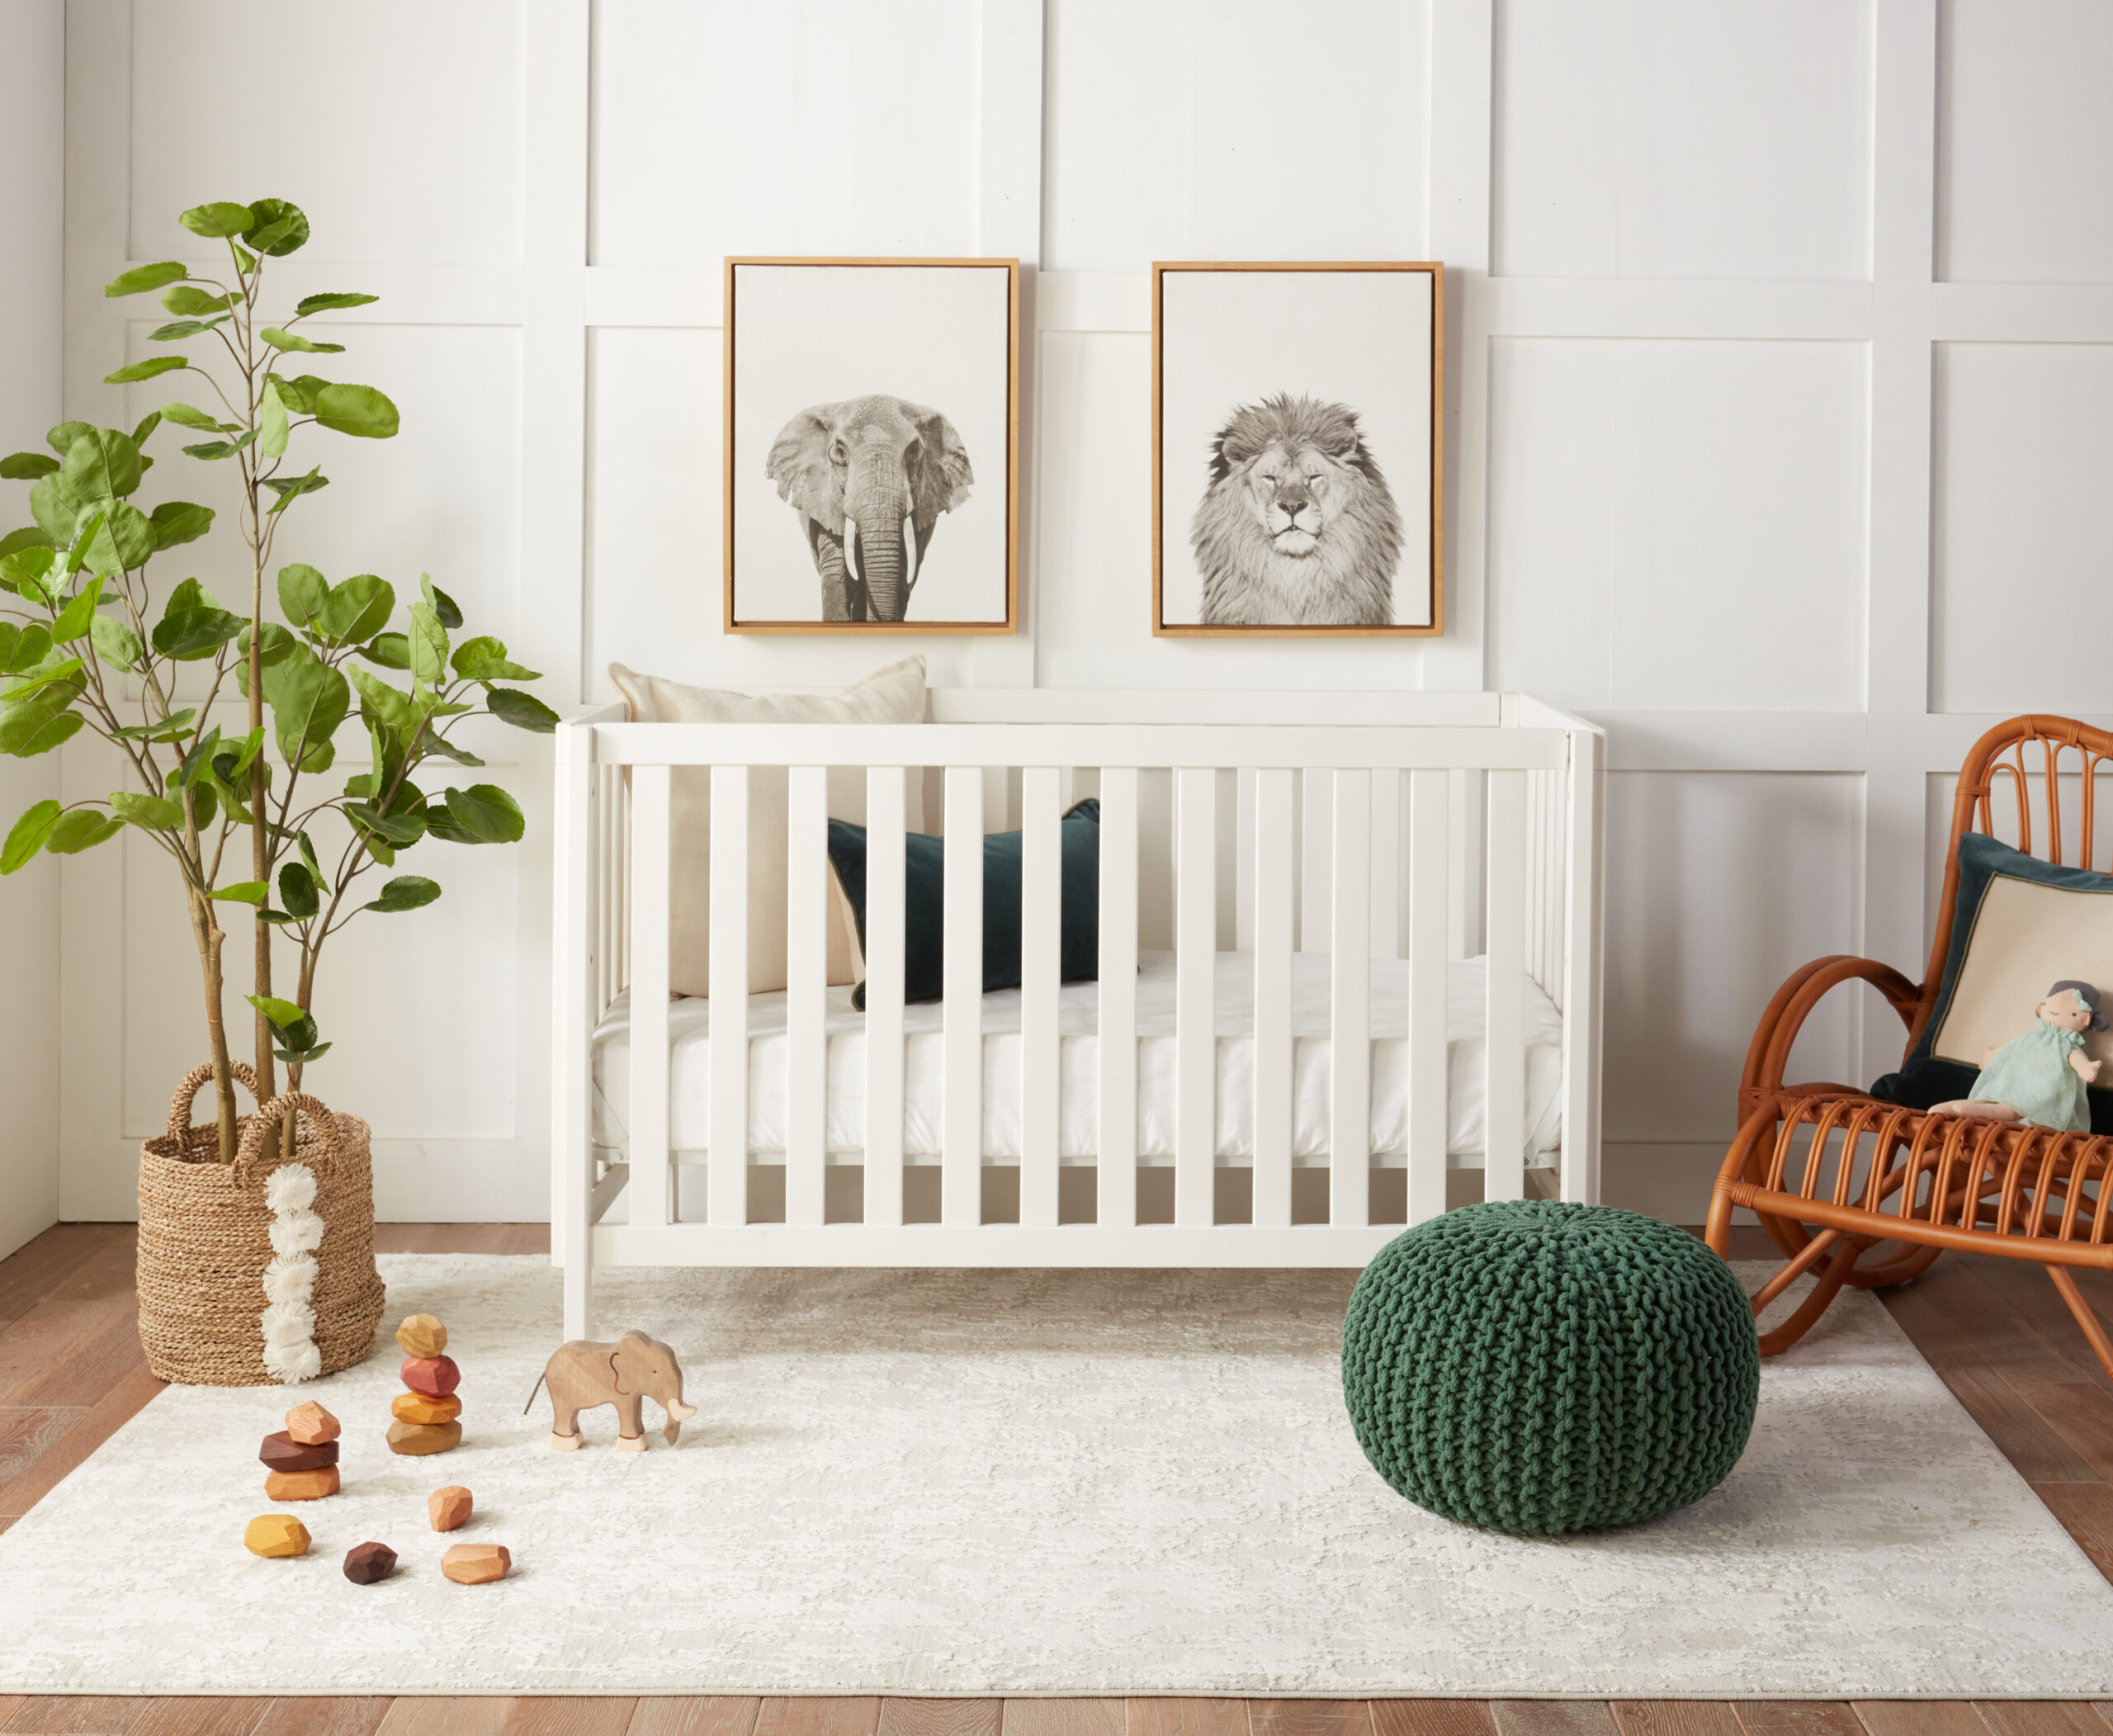 An all white nursery with a green pouf and animal prints